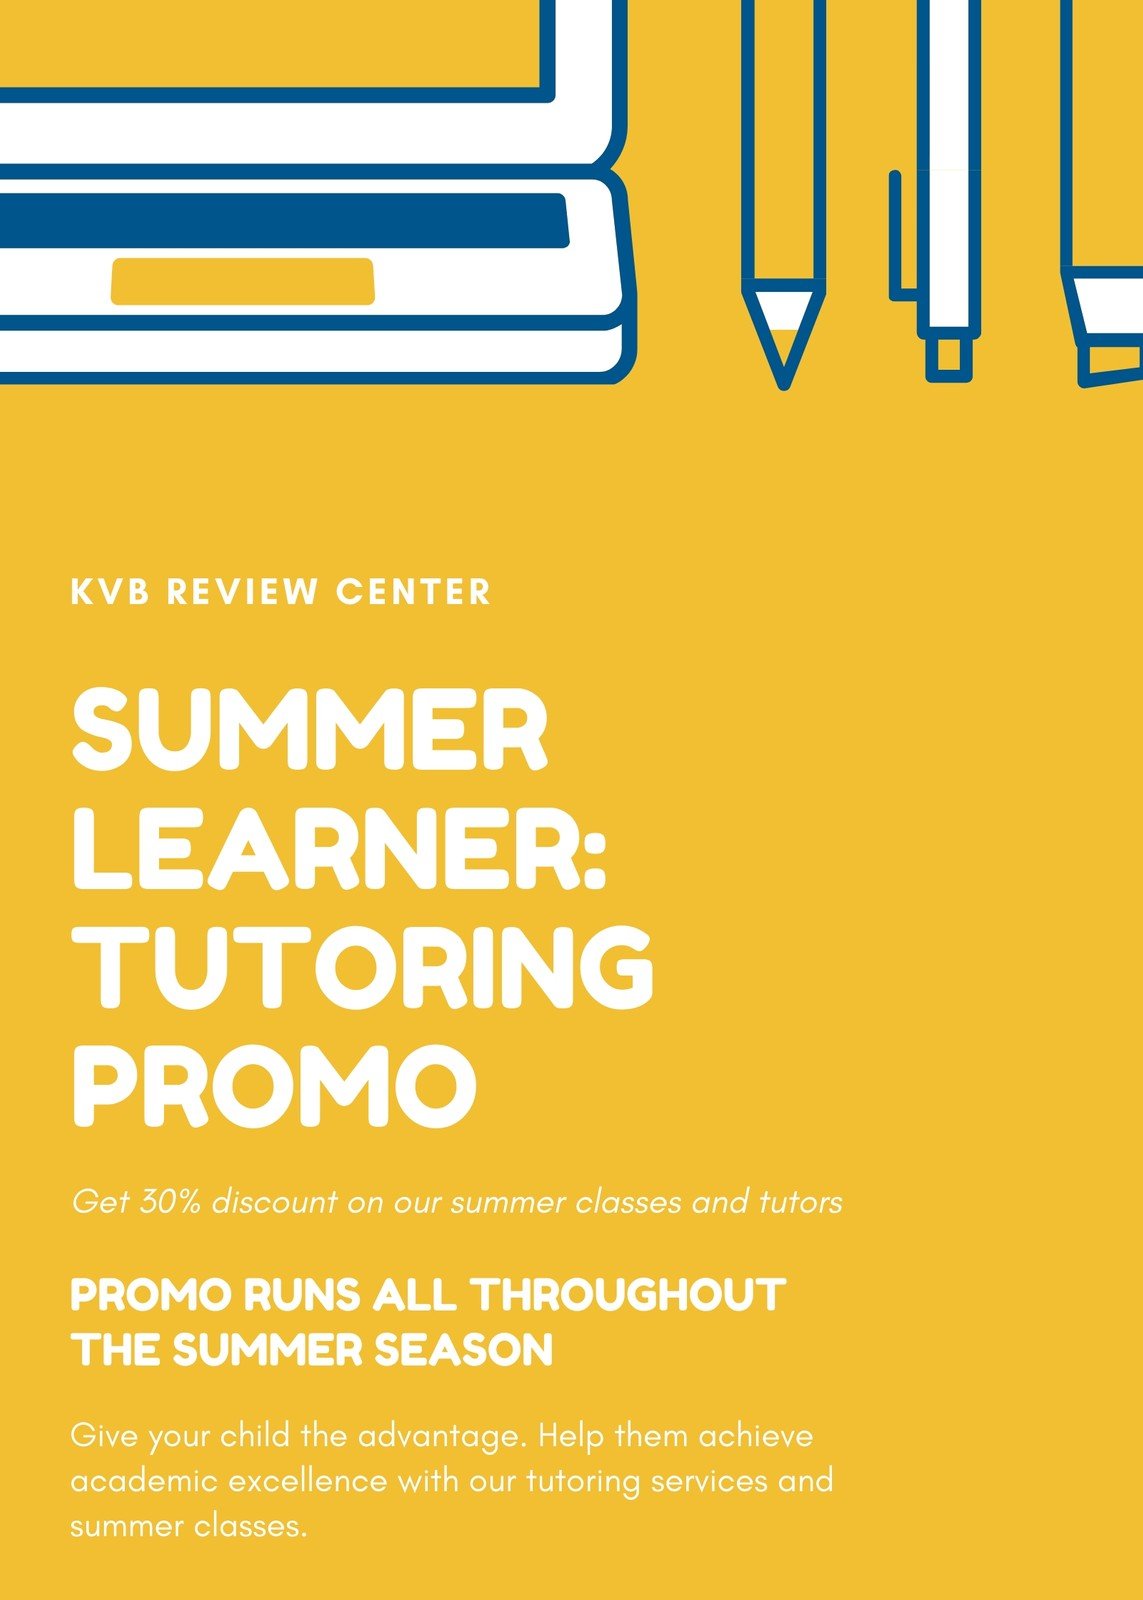 Customize 23+ Tutor Flyers Templates Online - Canva With Regard To Tutoring Flyer Template